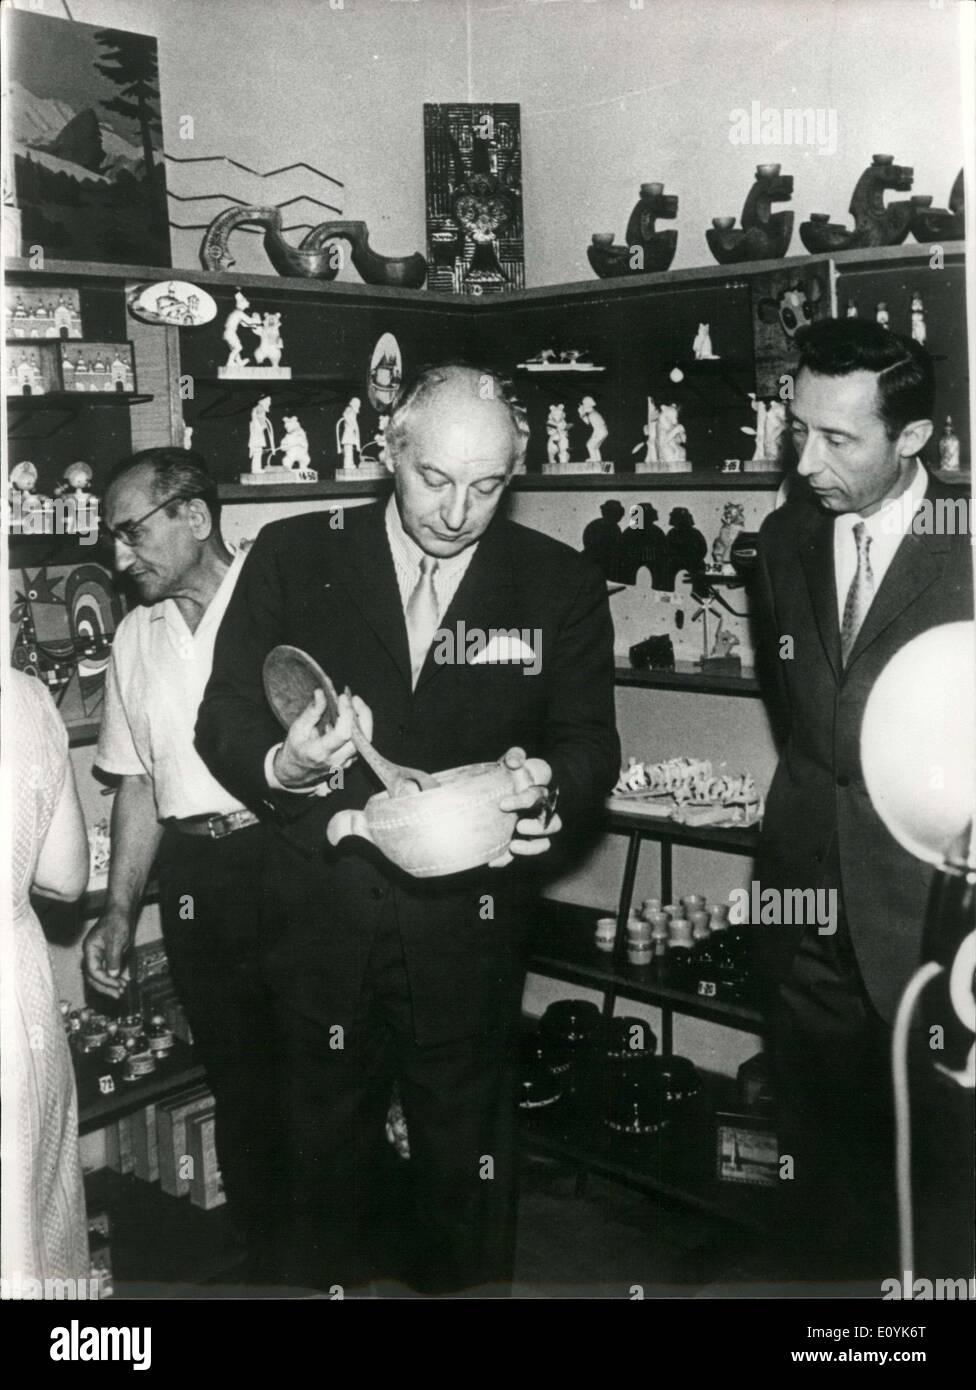 Aug. 07, 1970 - West Germany's Minsiter of Foreign Affairs, Walter Scheel (left), finds himself in Moscow to establish a political agreement with the Soviet Union. With about 80% of the agreement drafted, it could be signed by the end of the month. Here is Scheel visiting a local Russian souvenir shop. Stock Photo